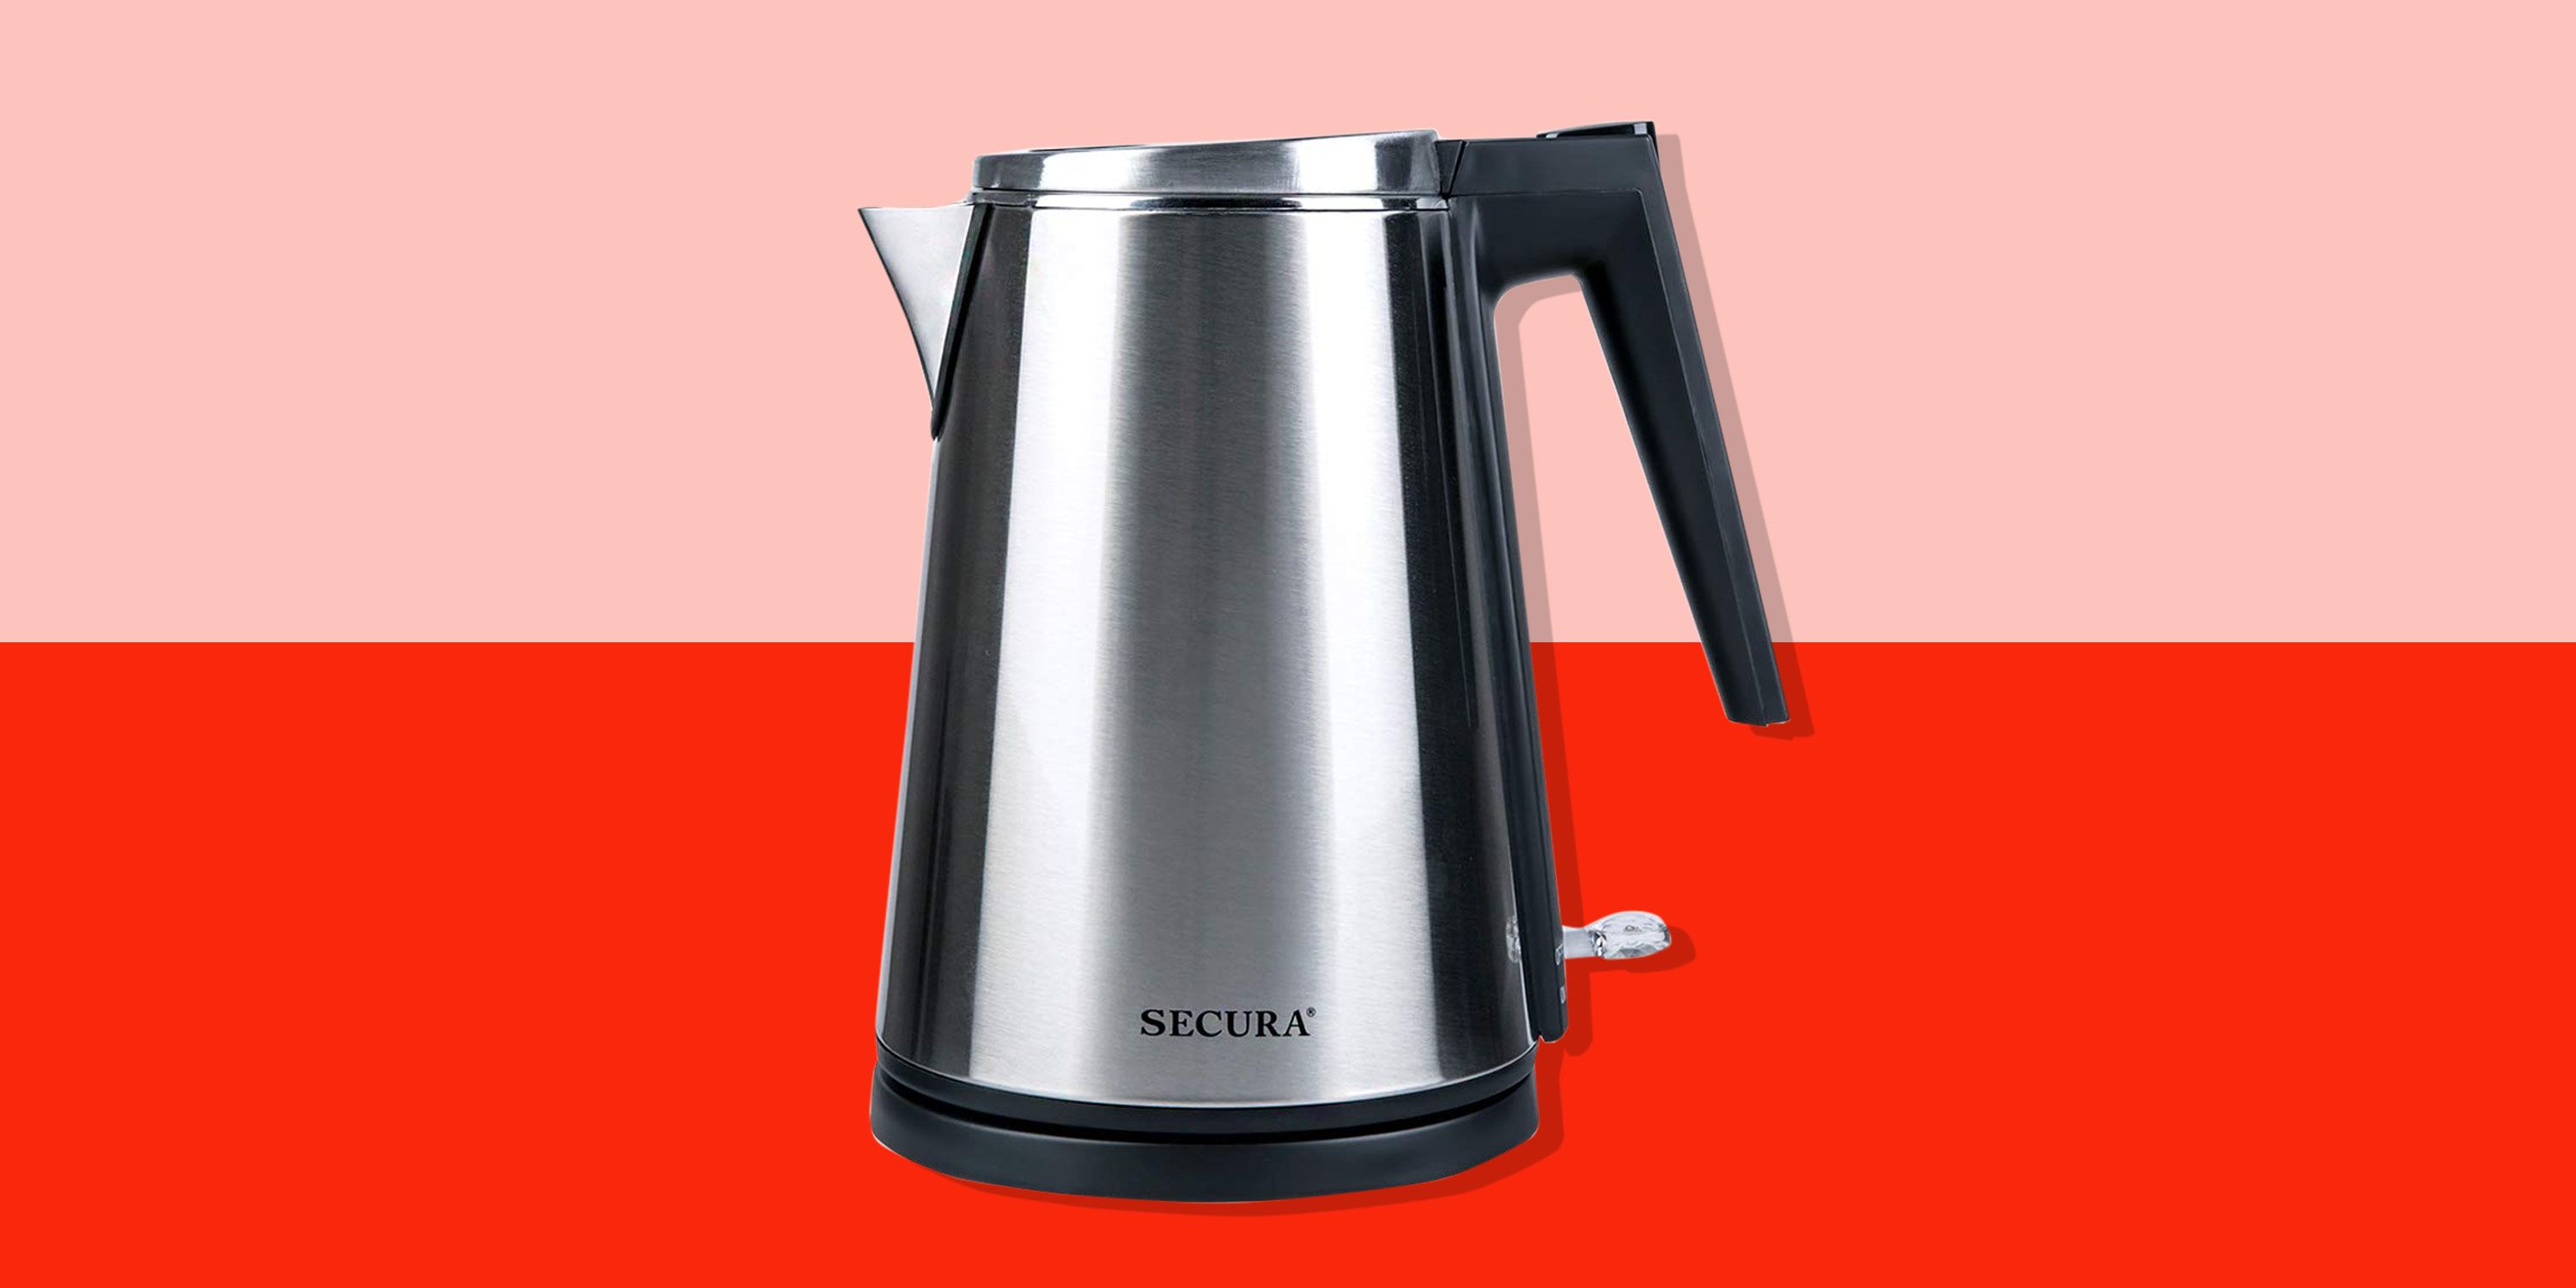 Original Double-Wall Electric Kettle